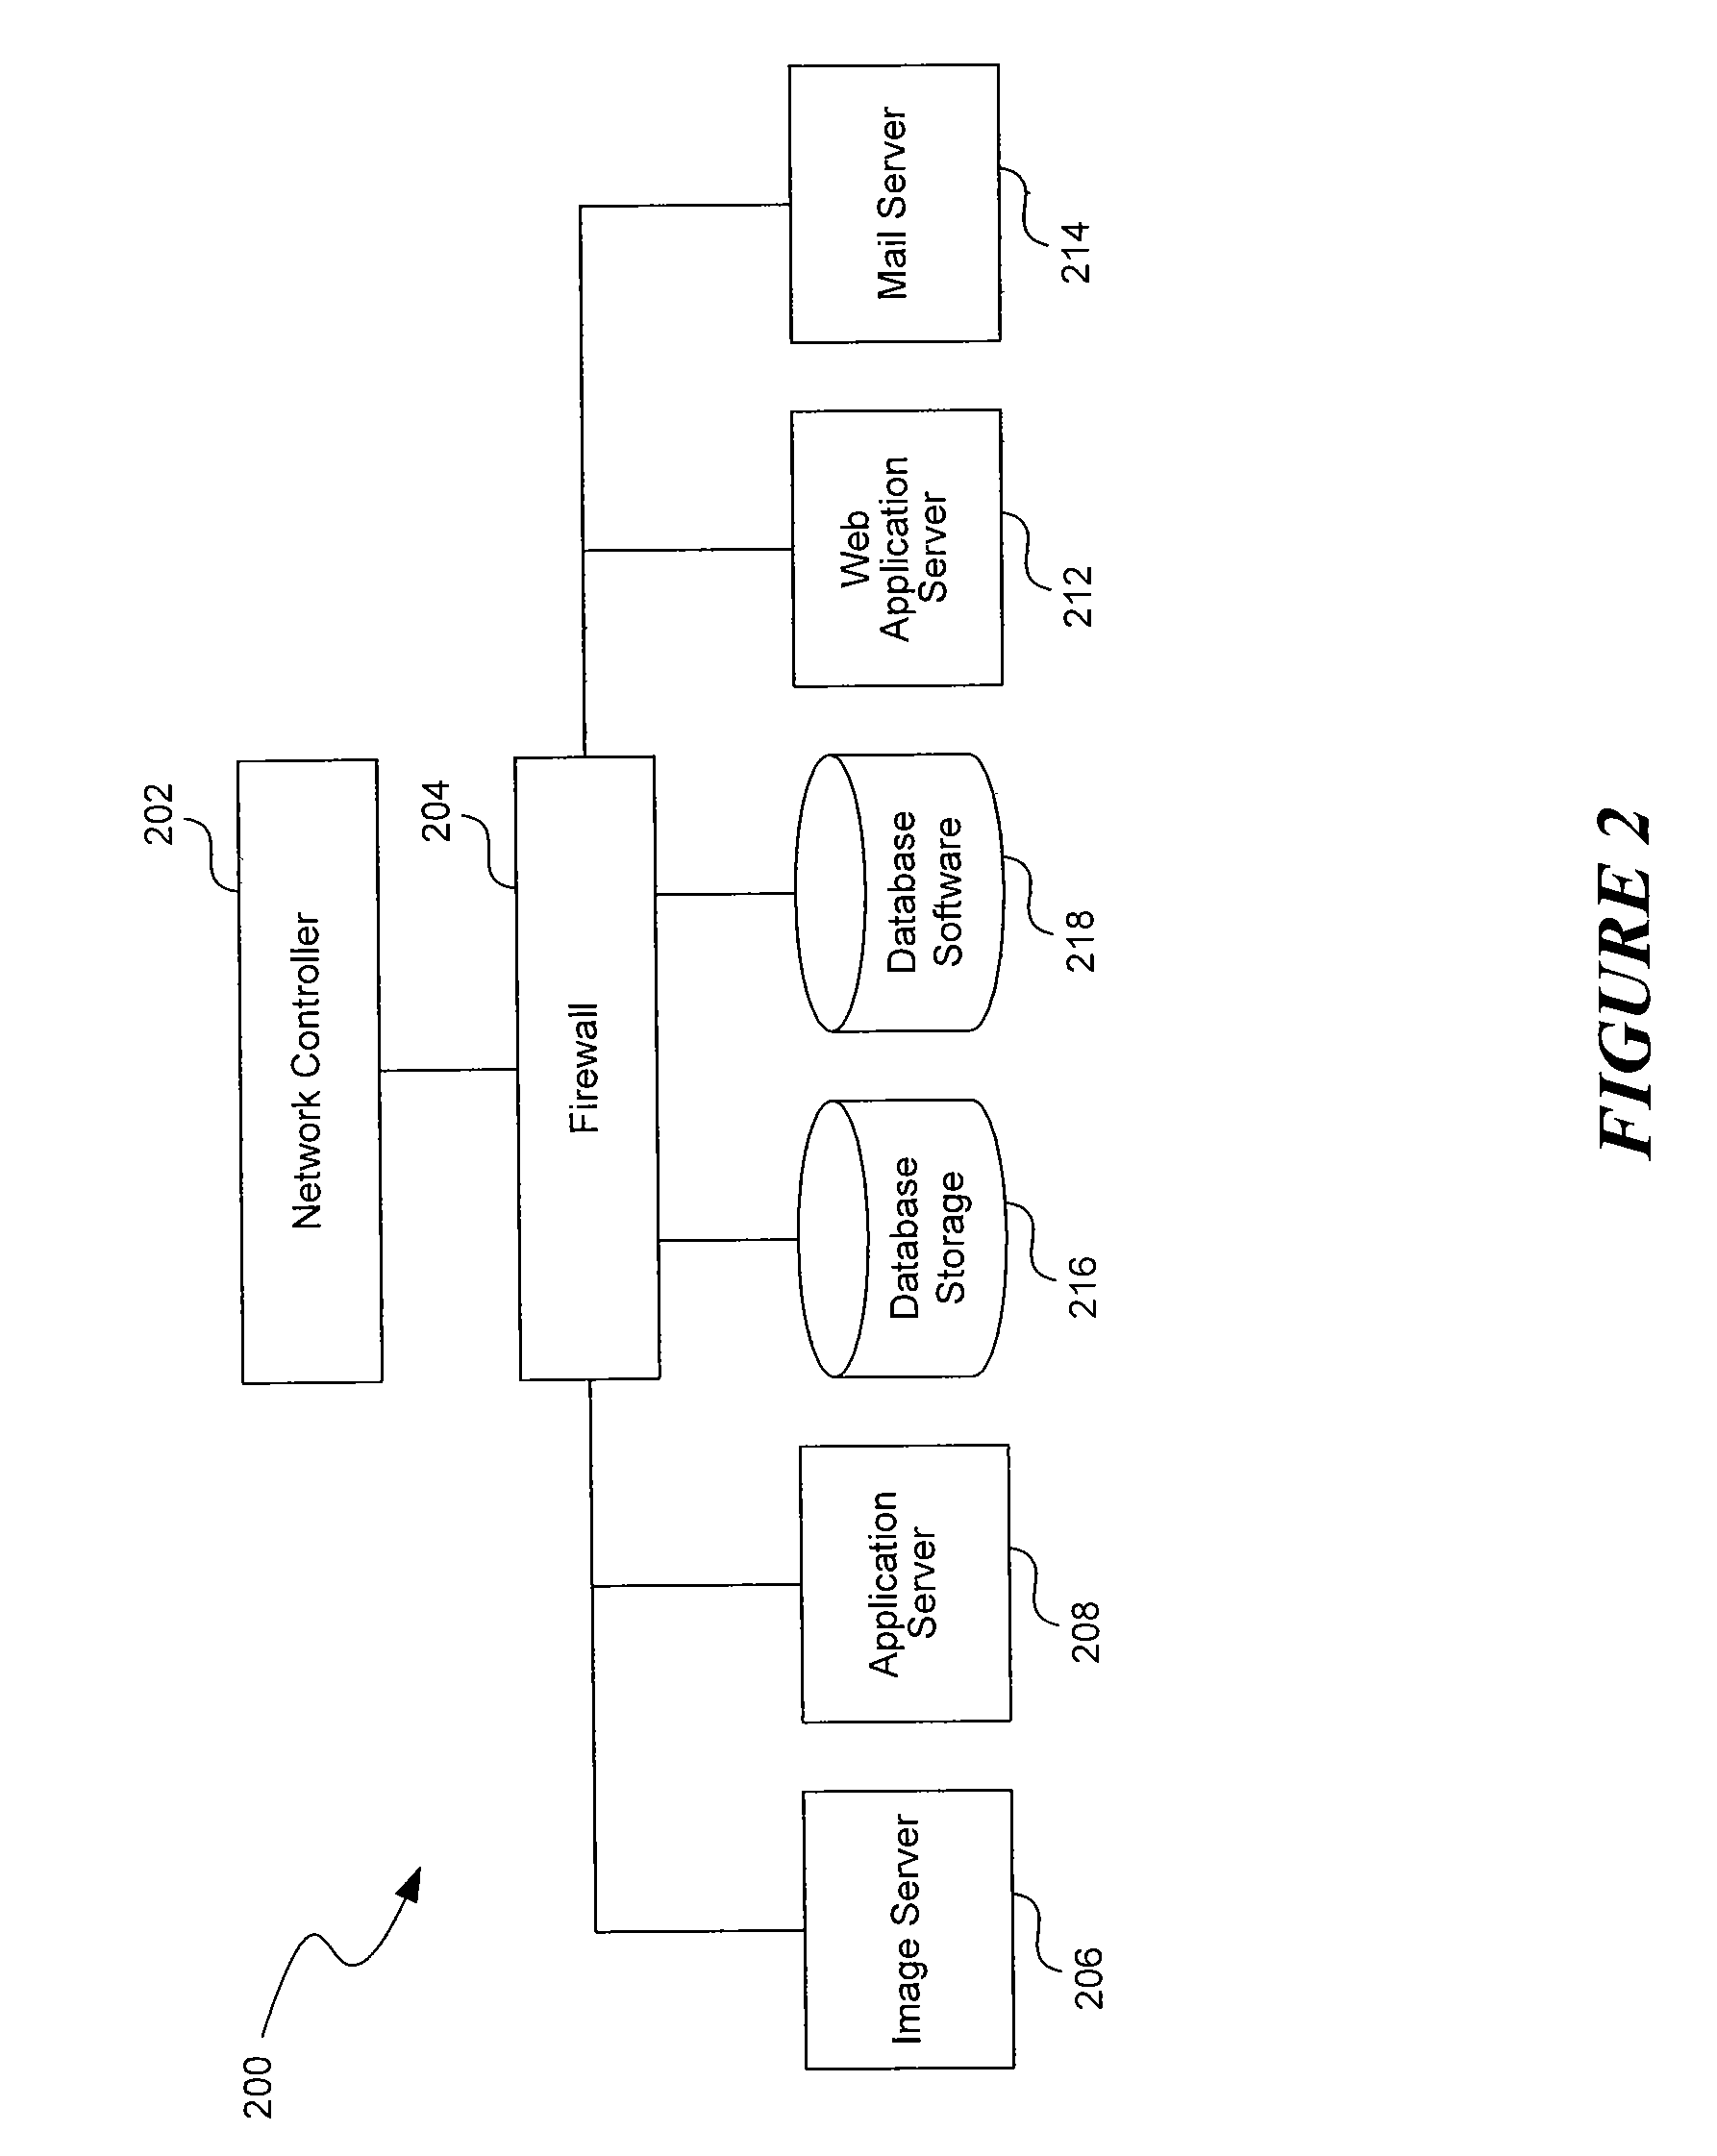 System And Method Of Collecting Market-Related Data Via A Web-Based Networking Environment